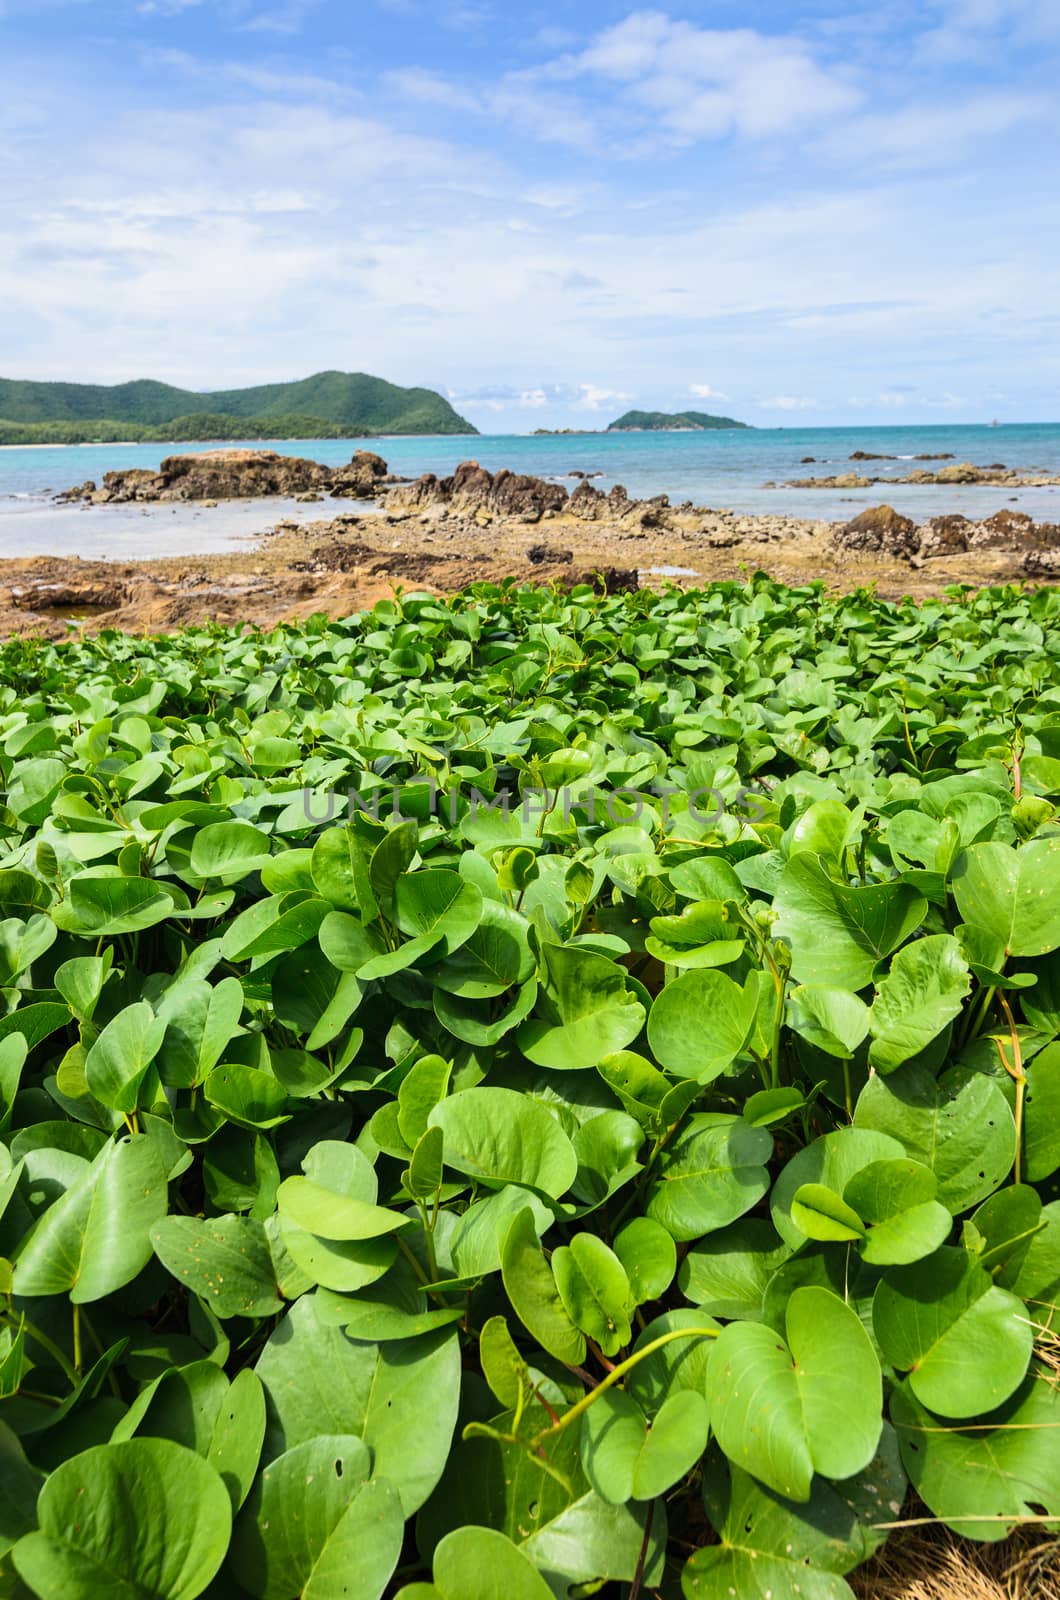 Green plants and sea nature landscape in Thailand